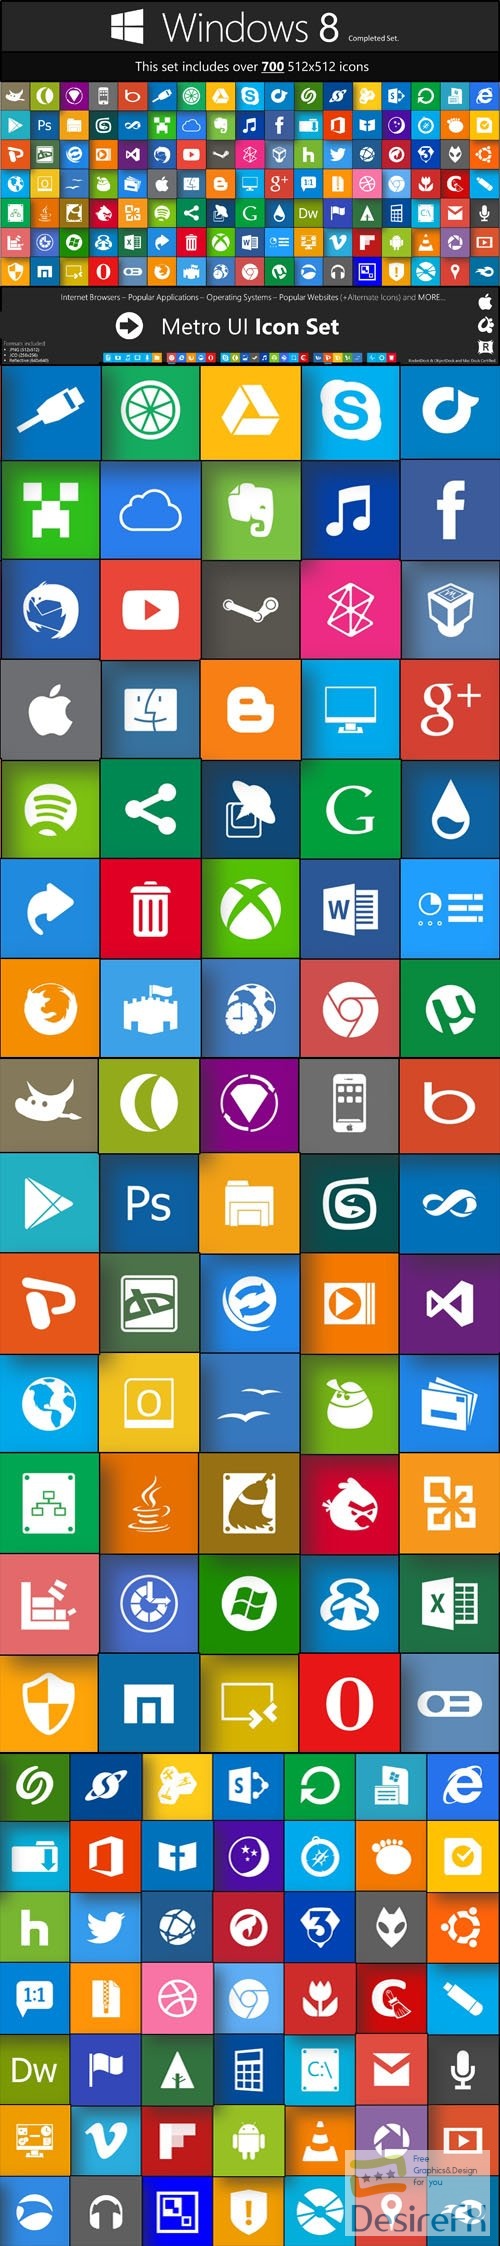 Win 8 Icons - Metro UI Icon Completed Set - 700+ Icons